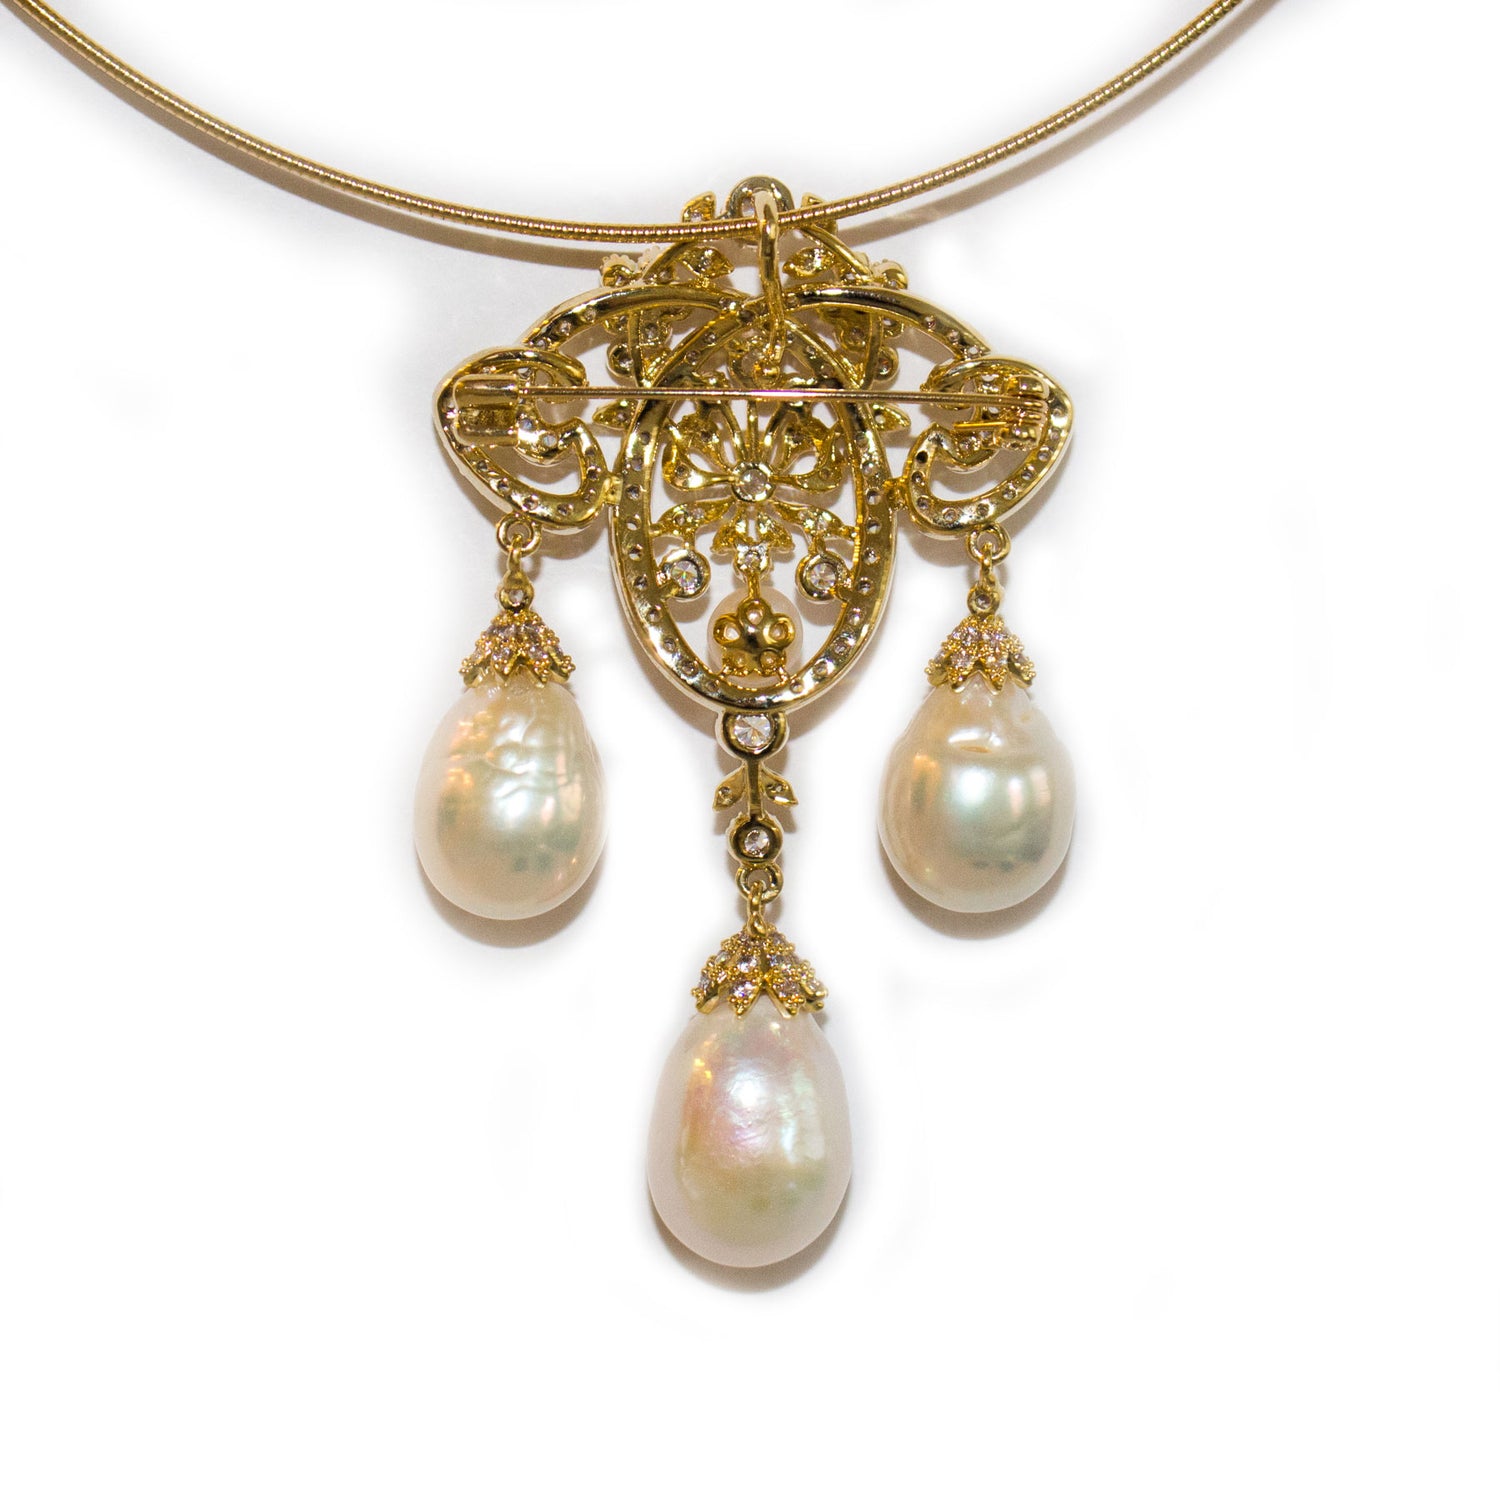 Life of Palace Edison Pearl Necklace Brooch - Timeless Pearl